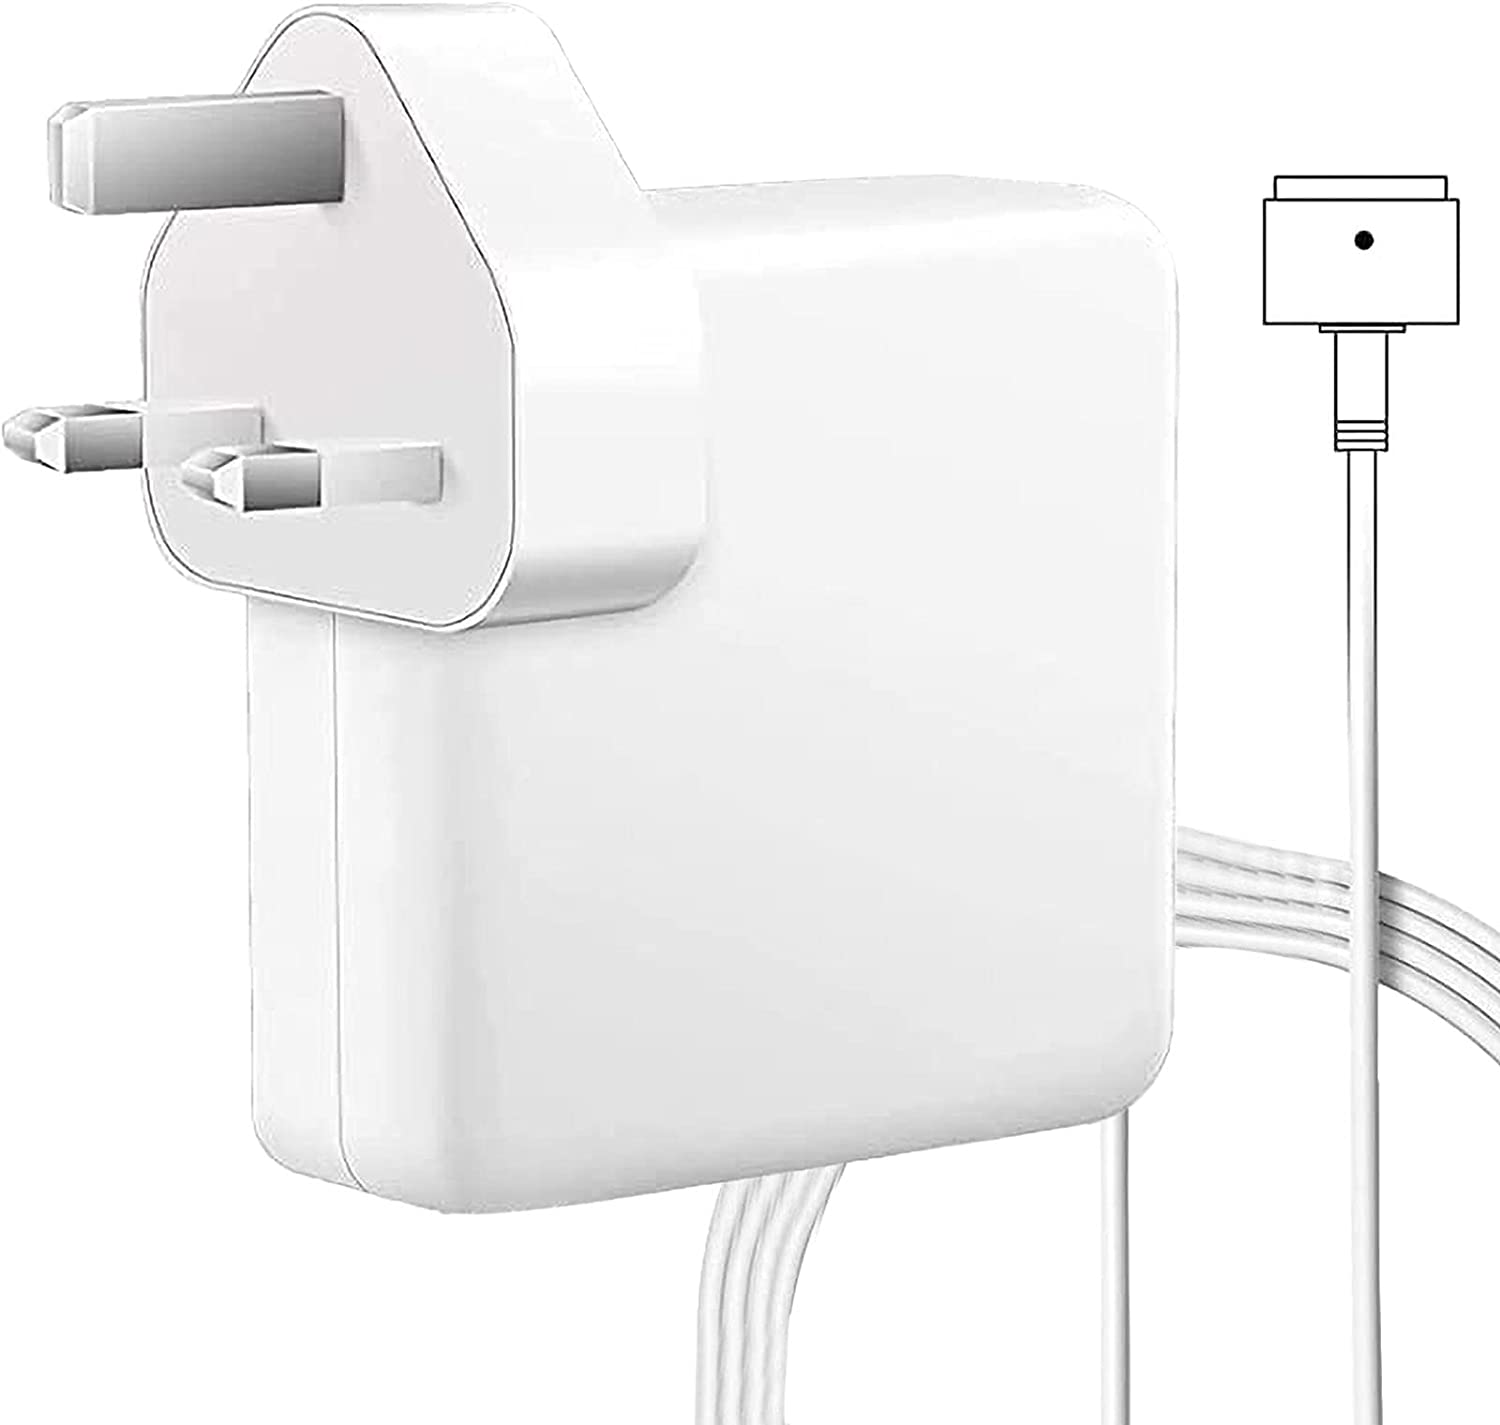 Apple MacBook Air Laptop Charger Power Supply Adapter 45W T-Tip